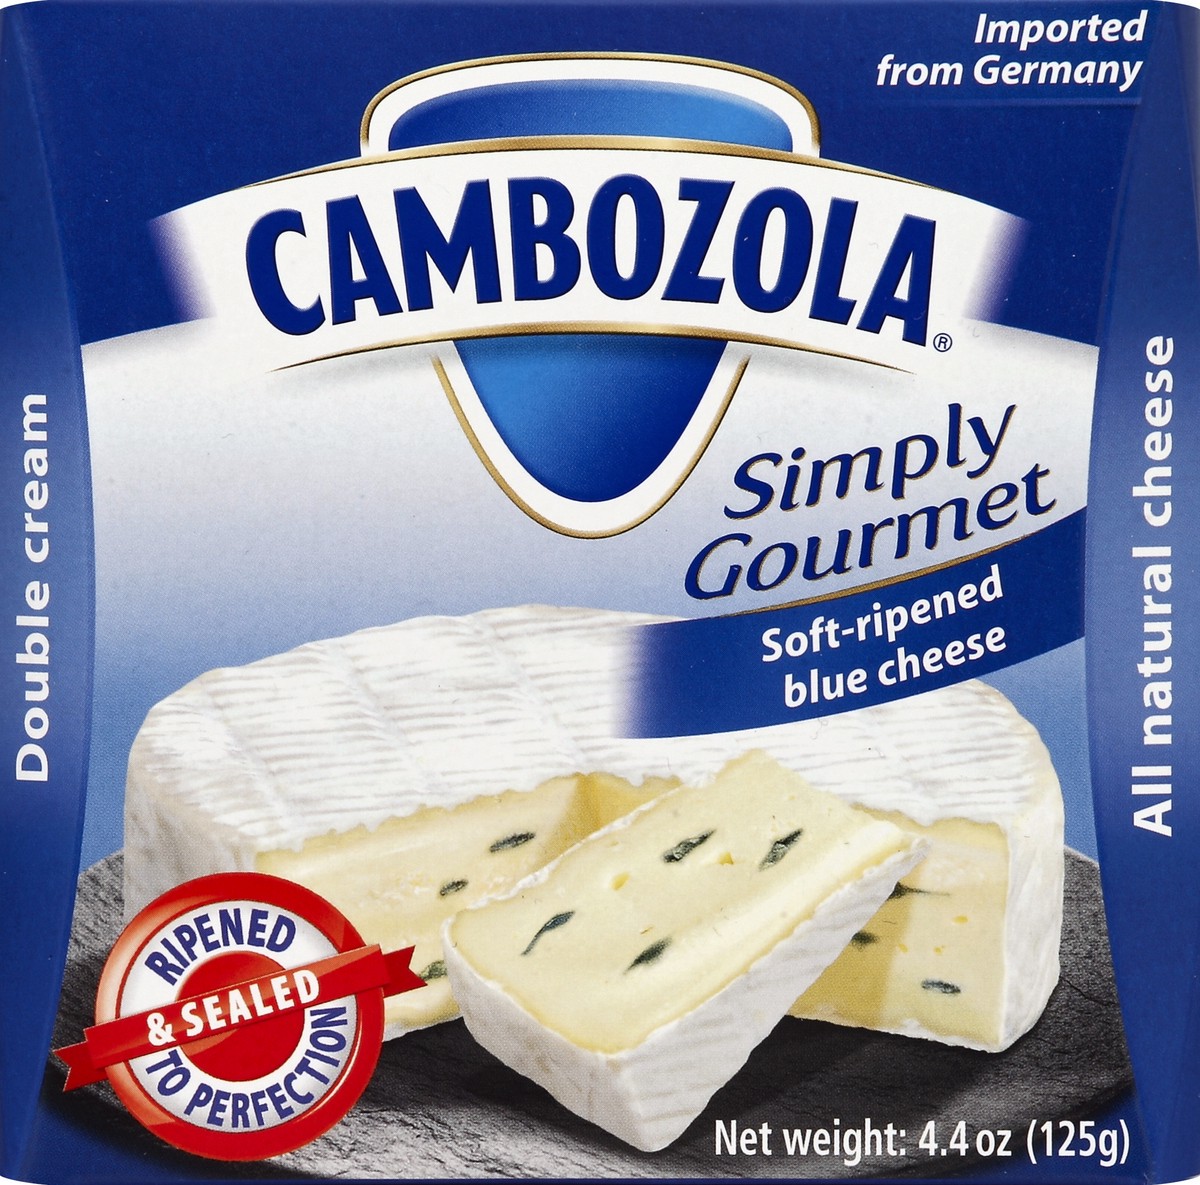 slide 4 of 4, Cambozola Simply Gourmet Soft-ripened Blue Cheese, 4.4 oz